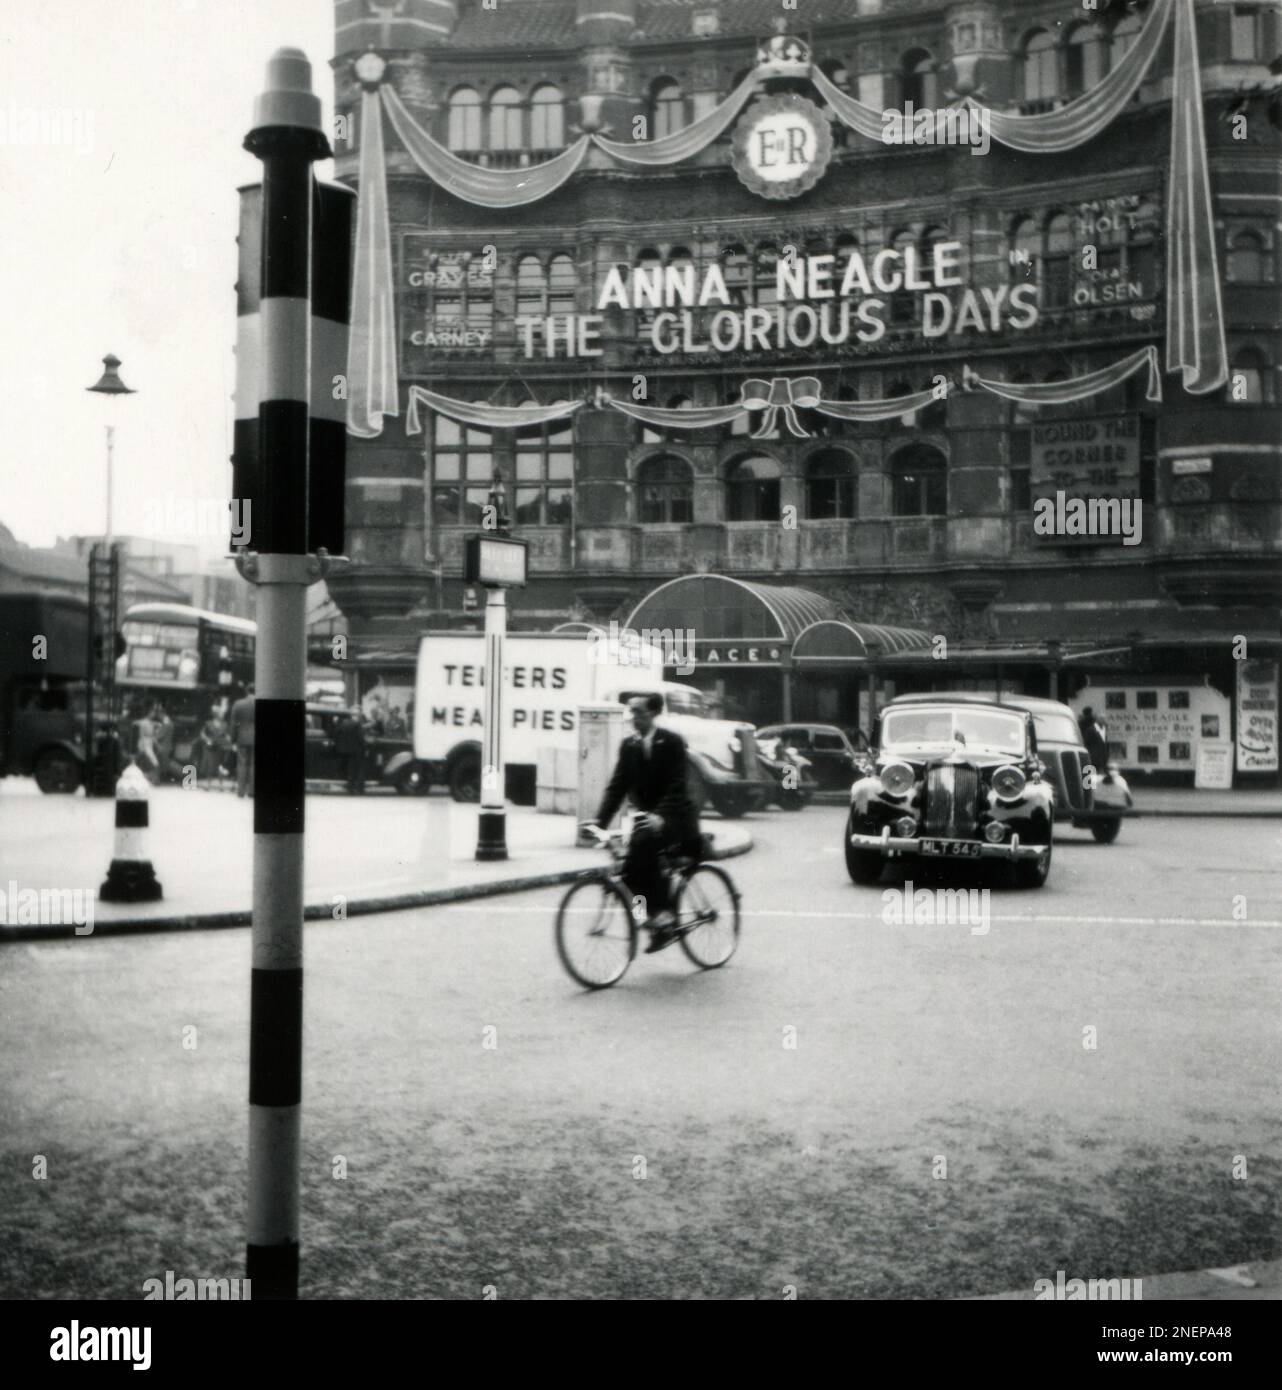 London, England. 1953. A view of The Palace Theatre in London’s West End, taken from the junction of Charing Cross and Cambridge Circus. The theatre has been decorated with a large Royal Cypher and faux ribbons, especially for the coronation of Queen Elizabeth II, which took place on 2nd June 1953. Showing at the theatre is the musical, ‘The Glorious Days’, starring Anna Neagle. Stock Photo